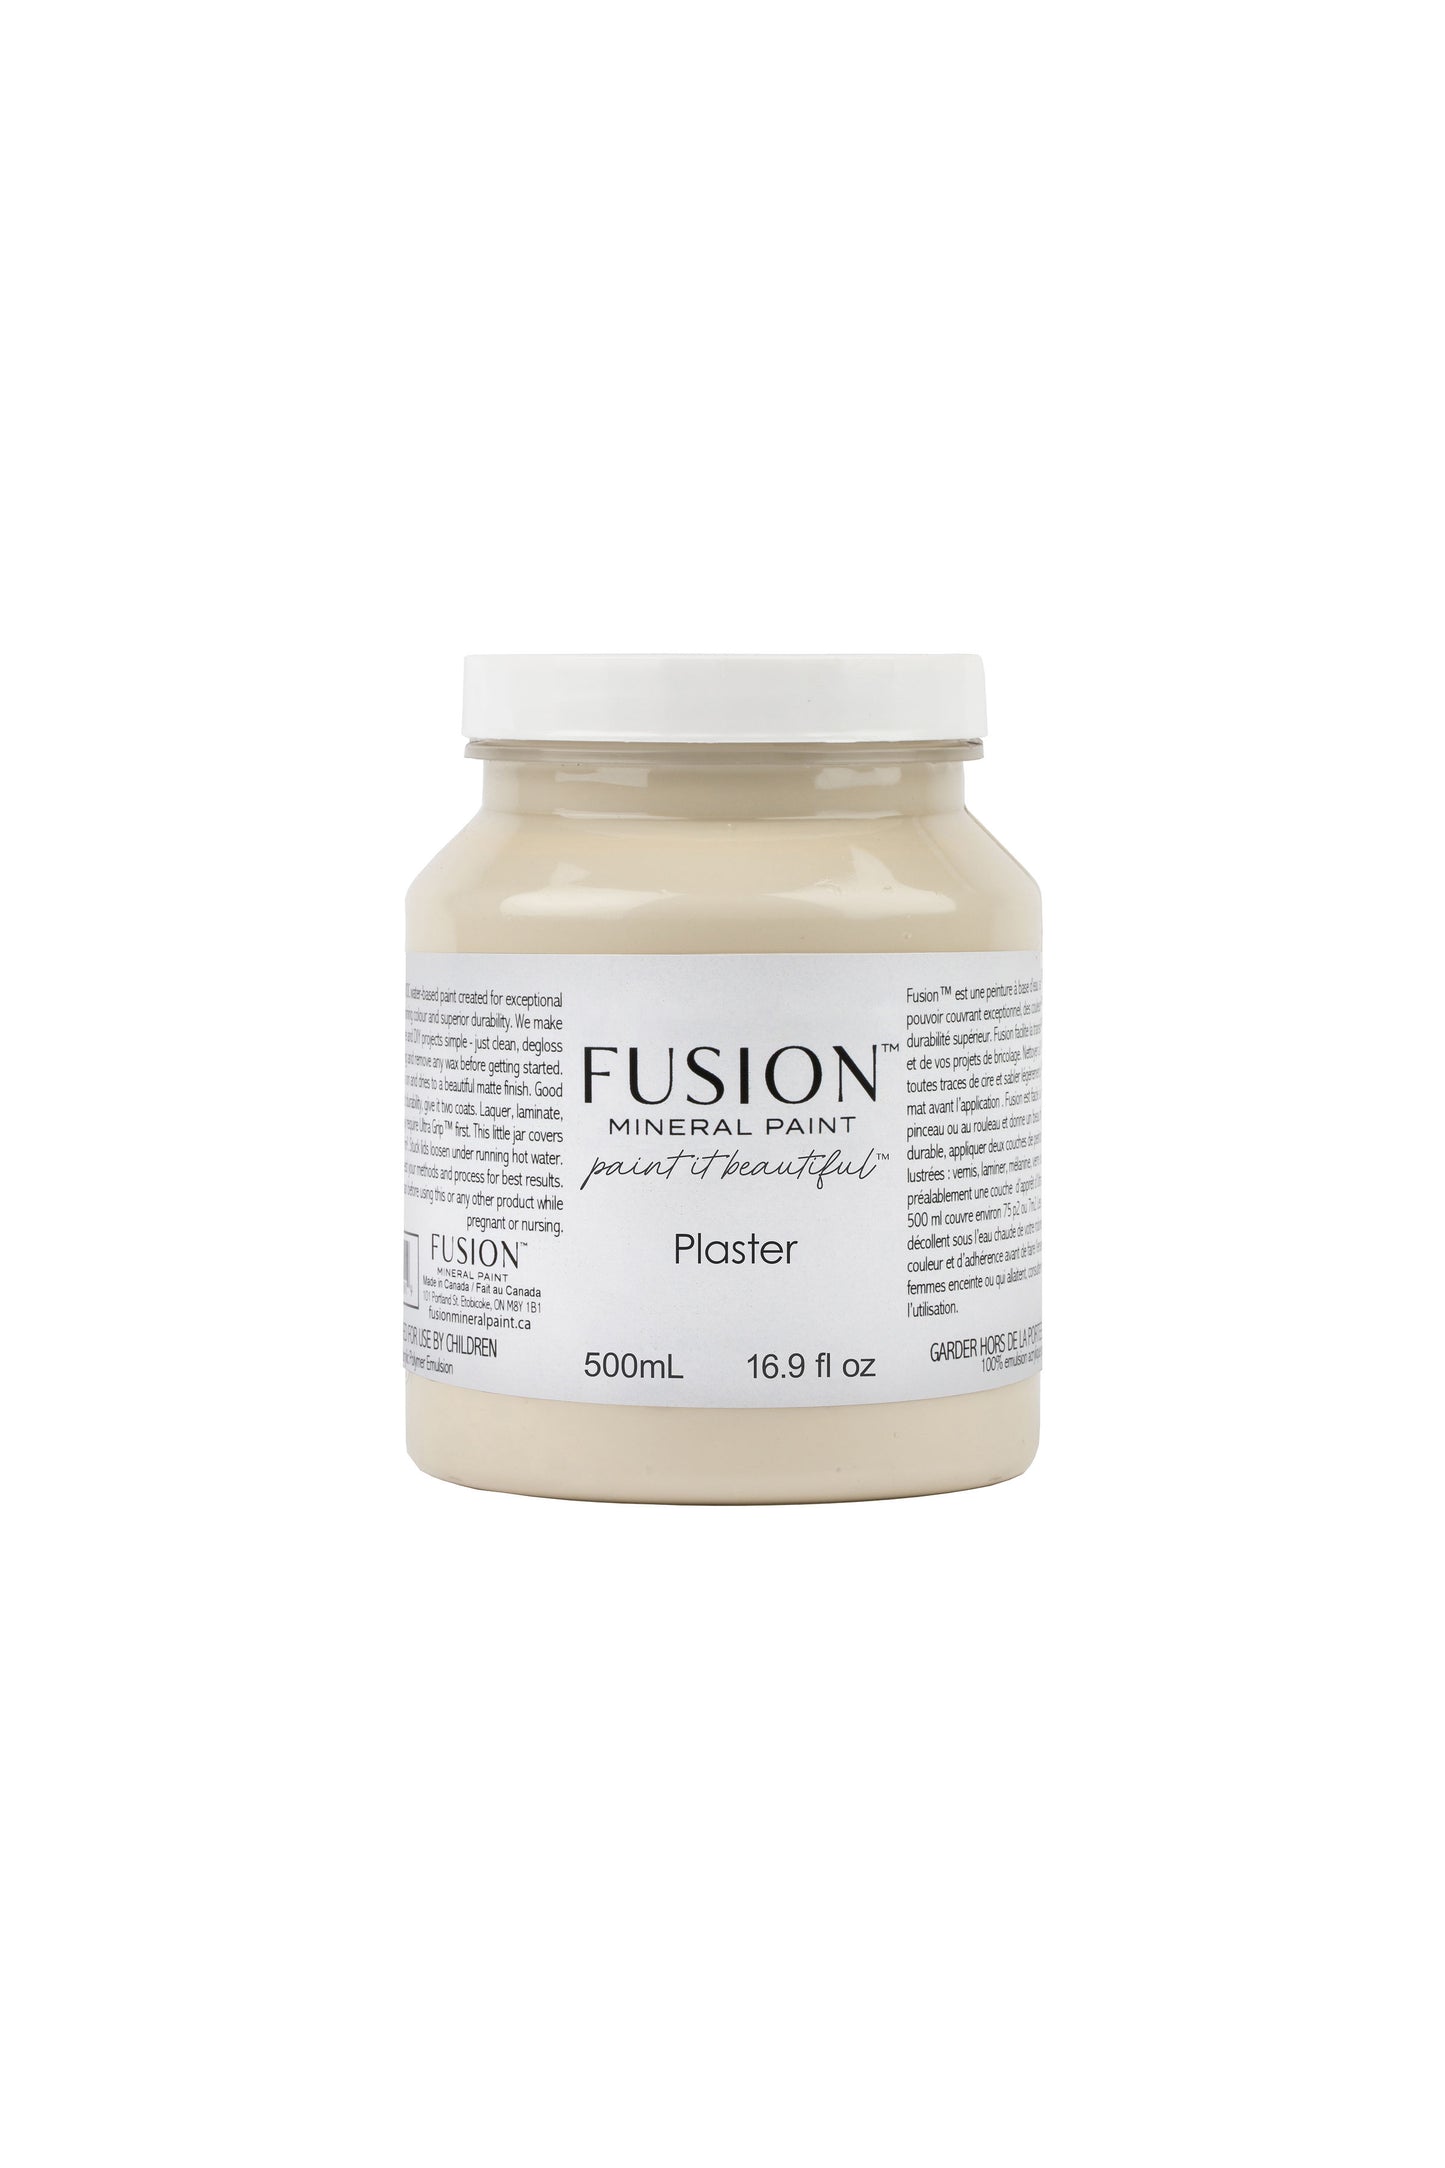 FUSION MINERAL PAINT- Plaster